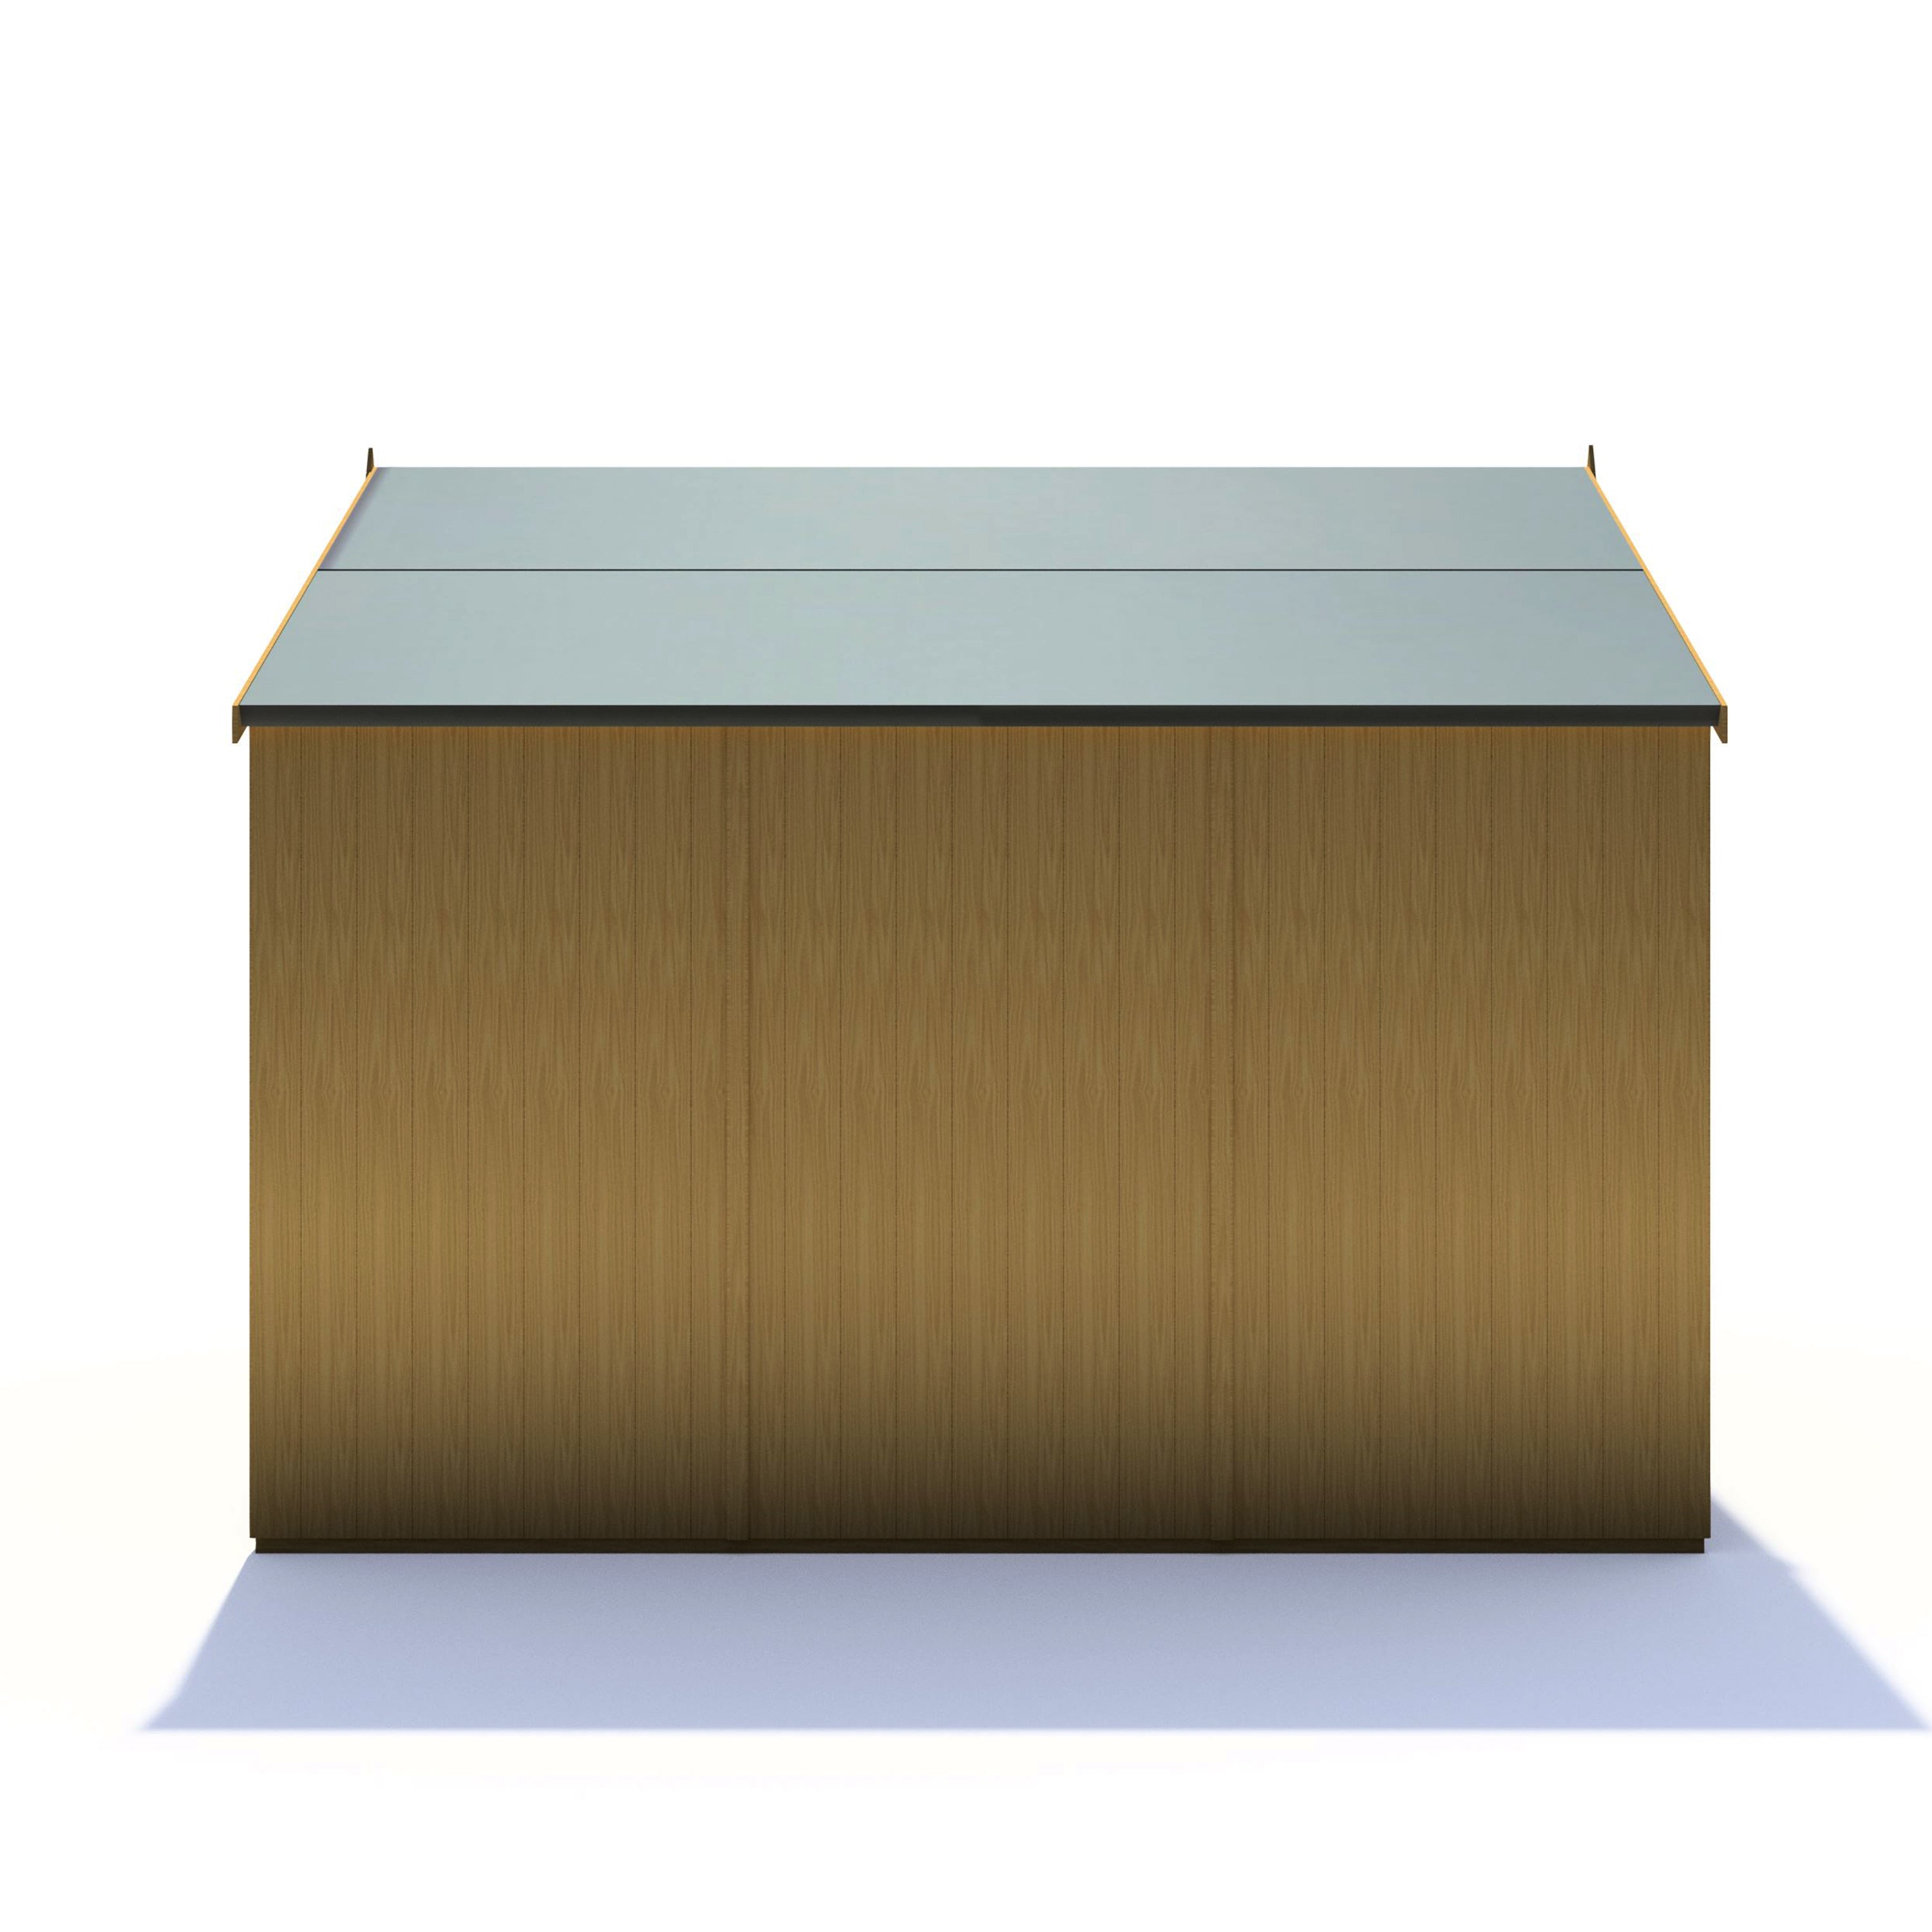 Shire Pressure Treated Holt Apex Garden Shed 7x10